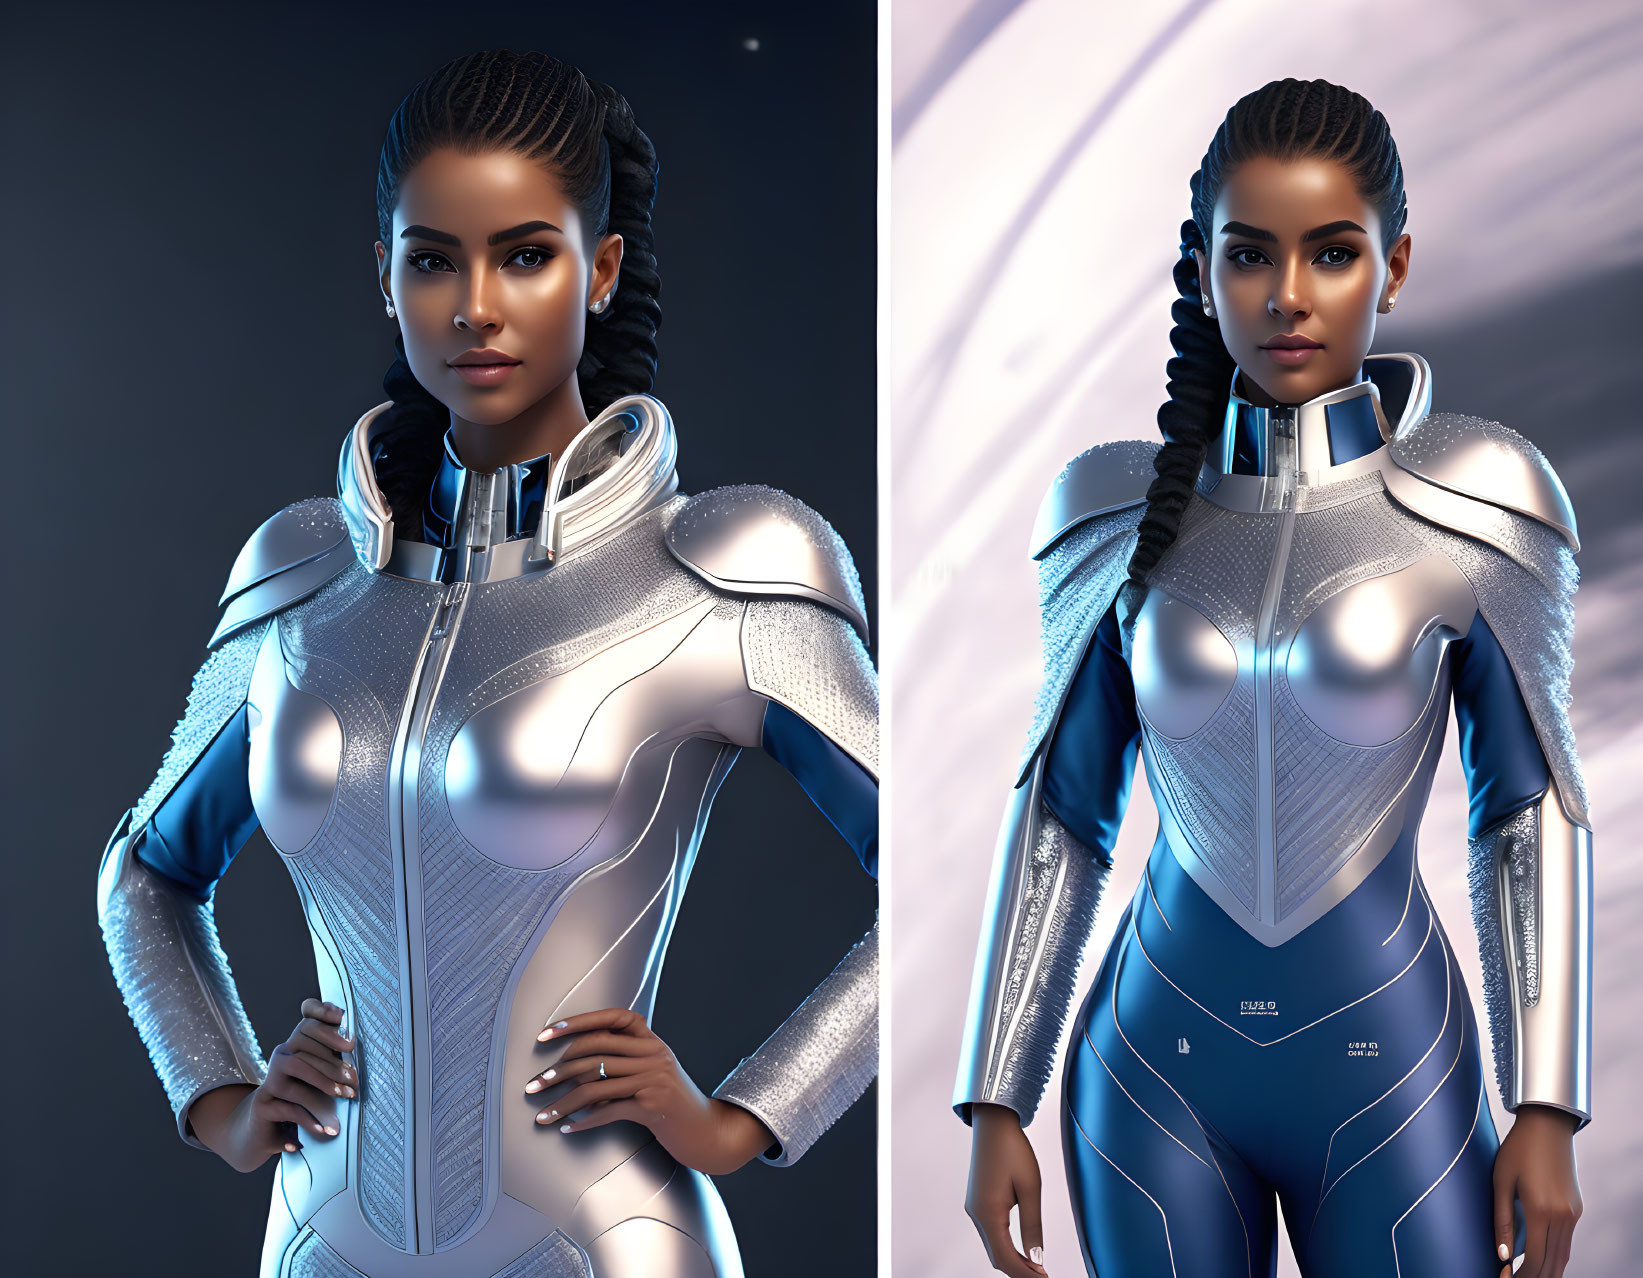 Black Female Character in Futuristic Silver & Blue Suit with Braided Hair